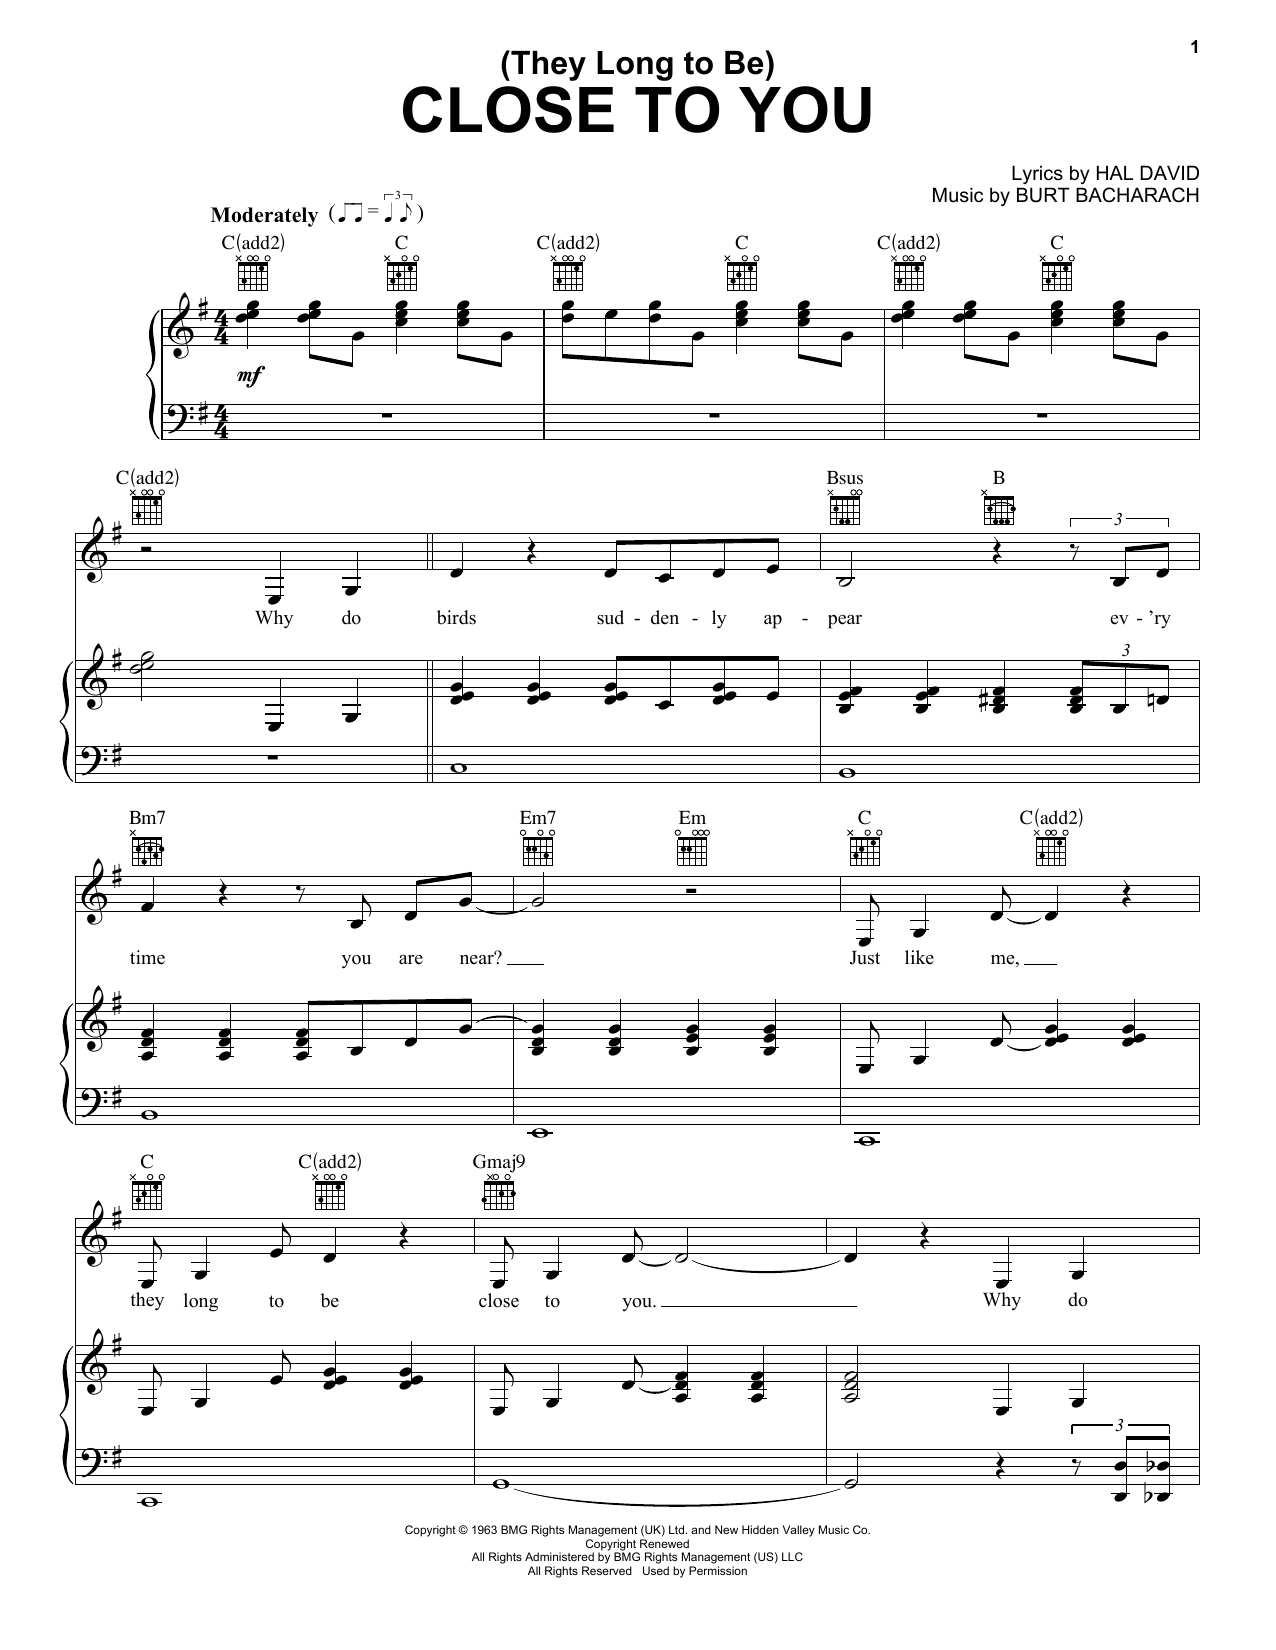 Carpenters (They Long To Be) Close To You sheet music notes and chords. Download Printable PDF.